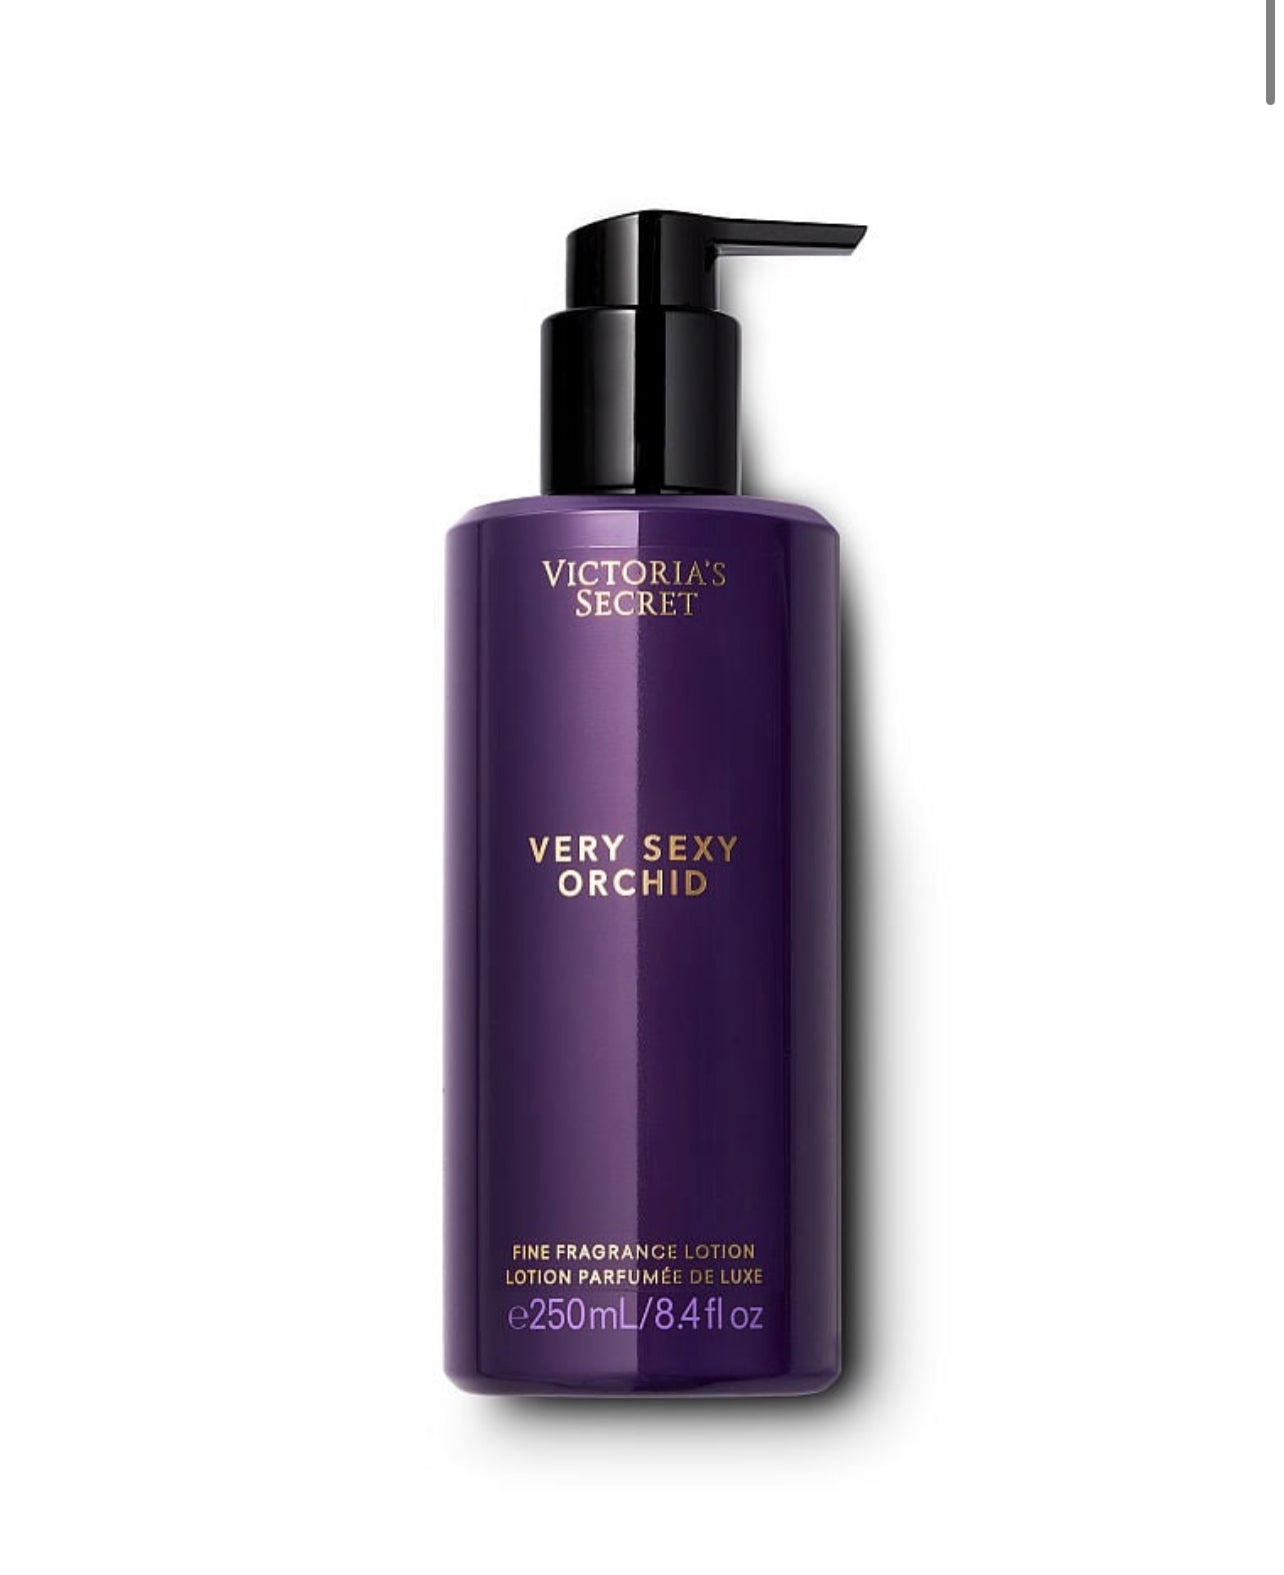 Victoria's Secret Fine Fragrance orchid very sexy Lotion